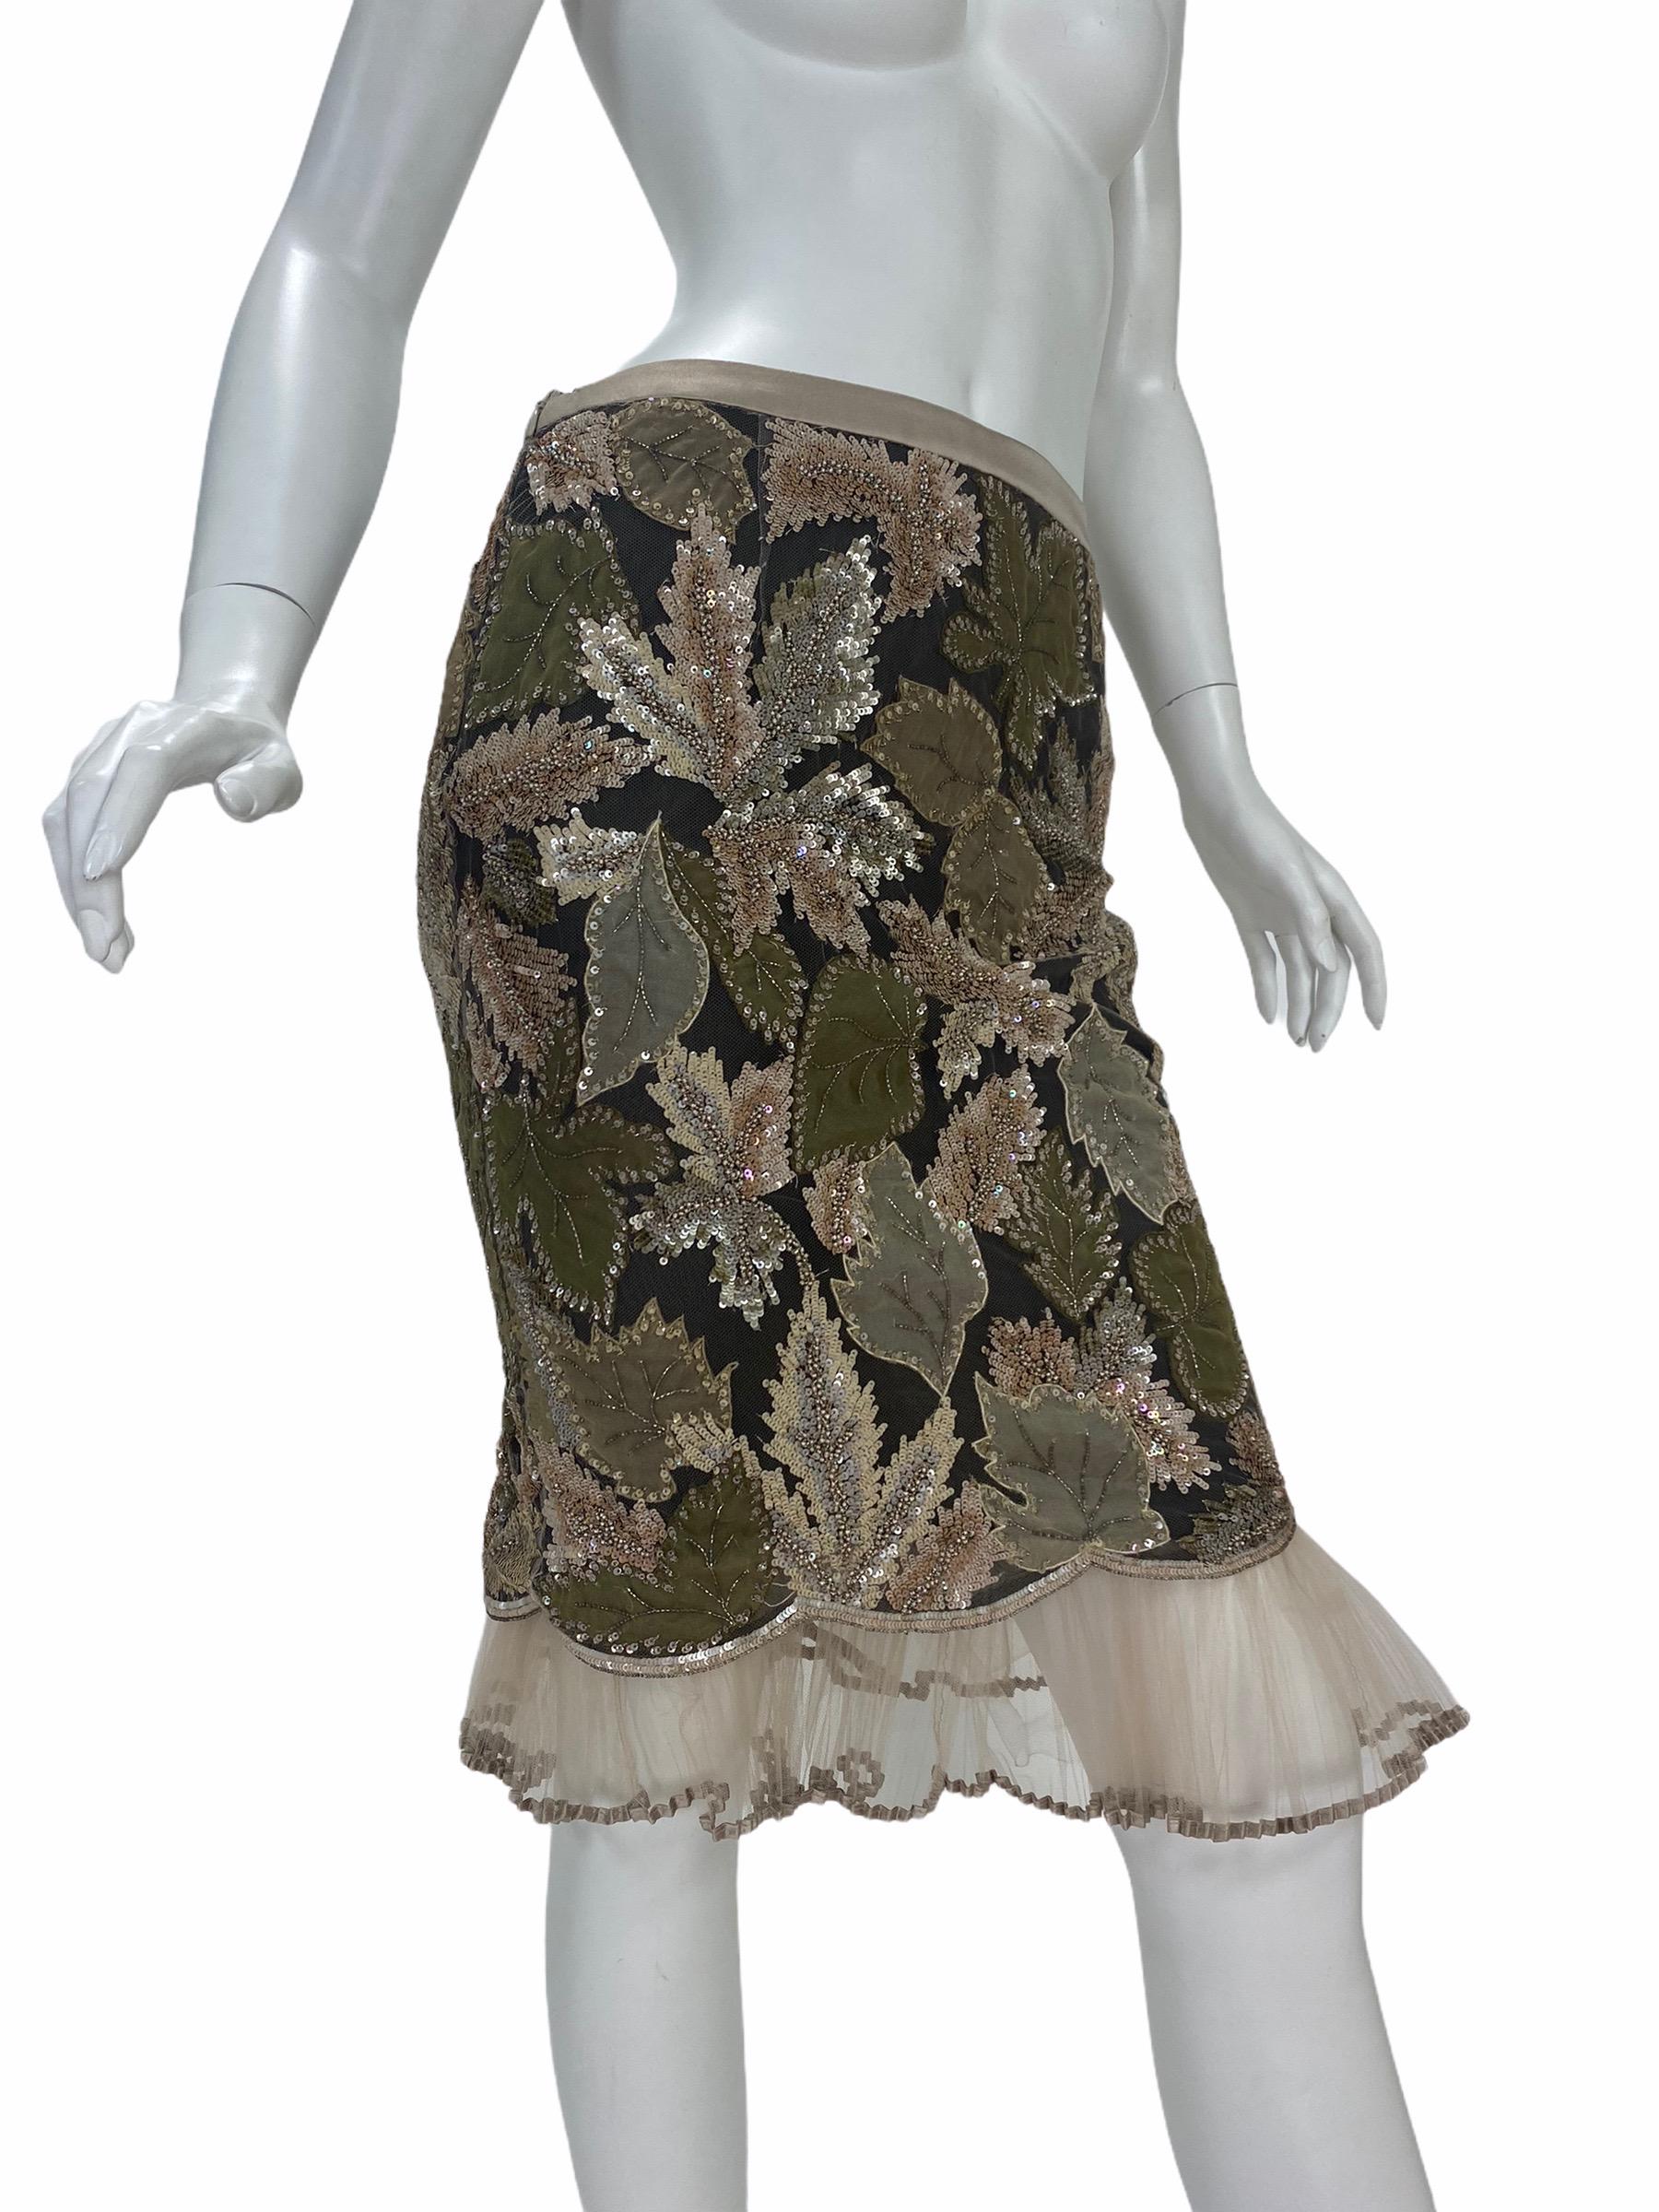 Vintage Valentino Embellished Tulle Skirt

Beige skirt with pleated tulle hem, sequin floral design throughout
and side zip closure.

Size tag removed

Measurements: Waist 28“, Hip 36“, Length 23.5“

Excellent condition 
